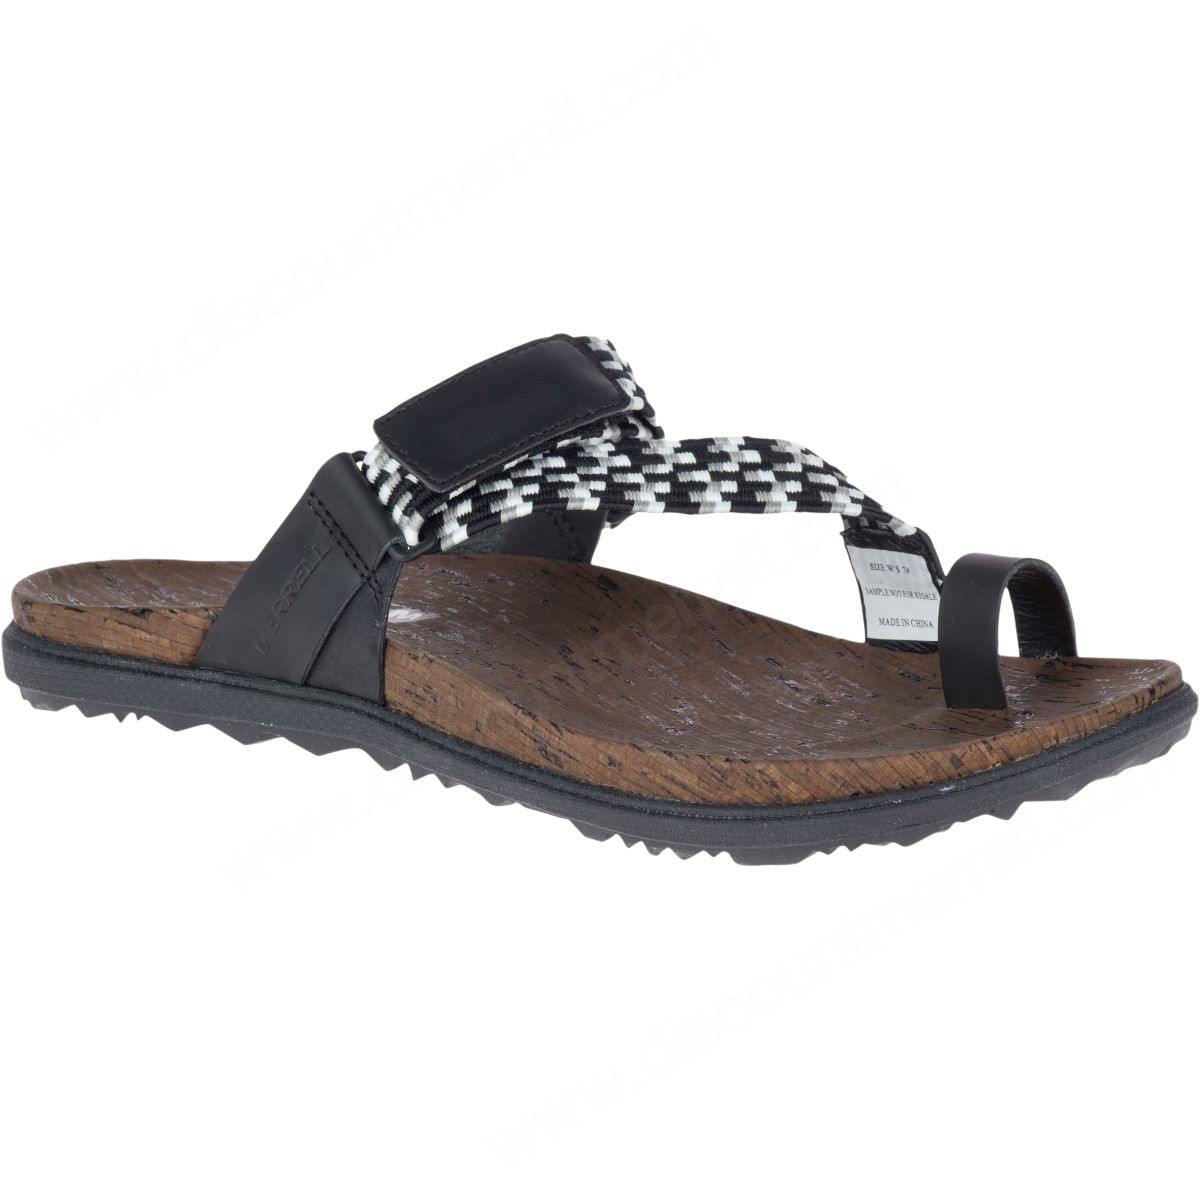 Merrell Lady's Around Town Sunvue Thong Woven Black - Merrell Lady's Around Town Sunvue Thong Woven Black